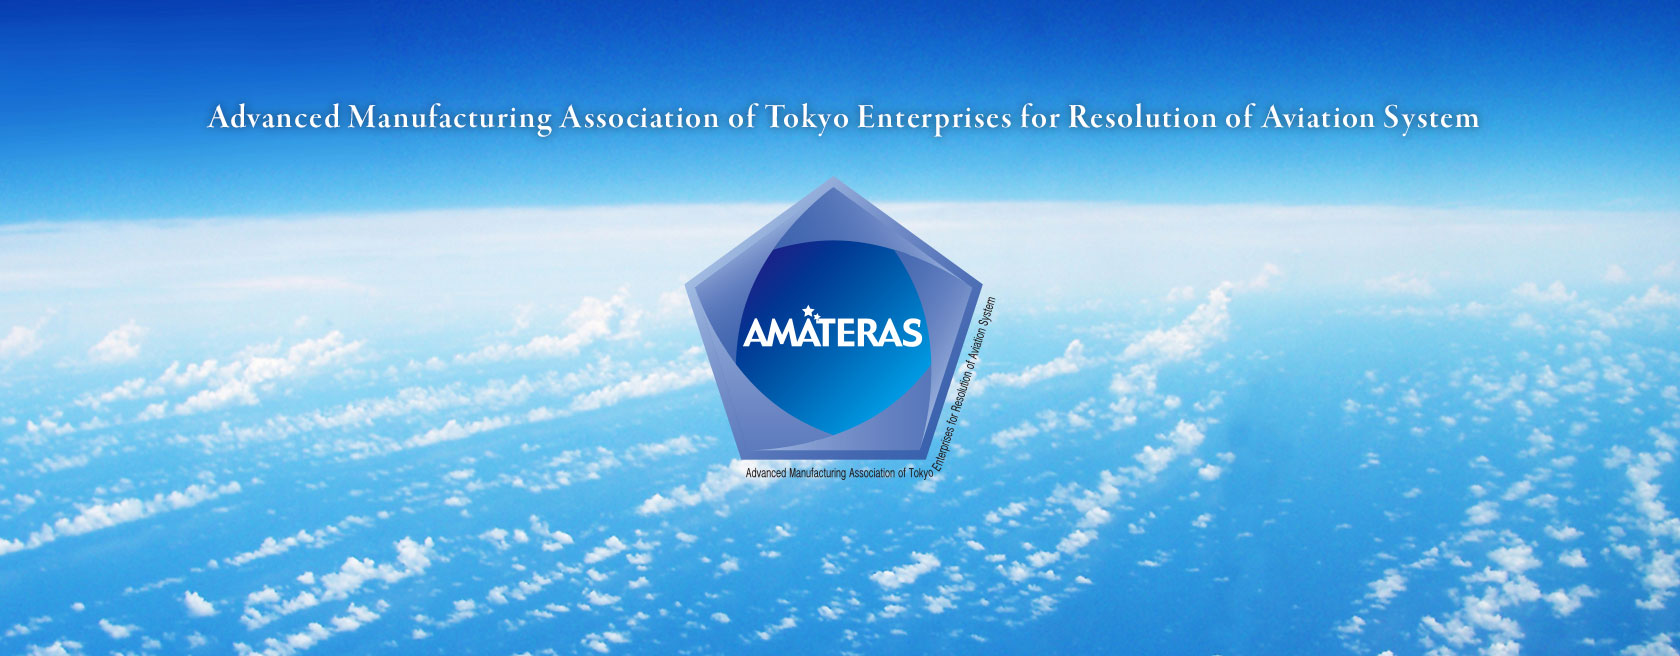 AMATERAS -Advanced Manufacturing Association of Tokyo Enterprises for Resolution of Aviation System-